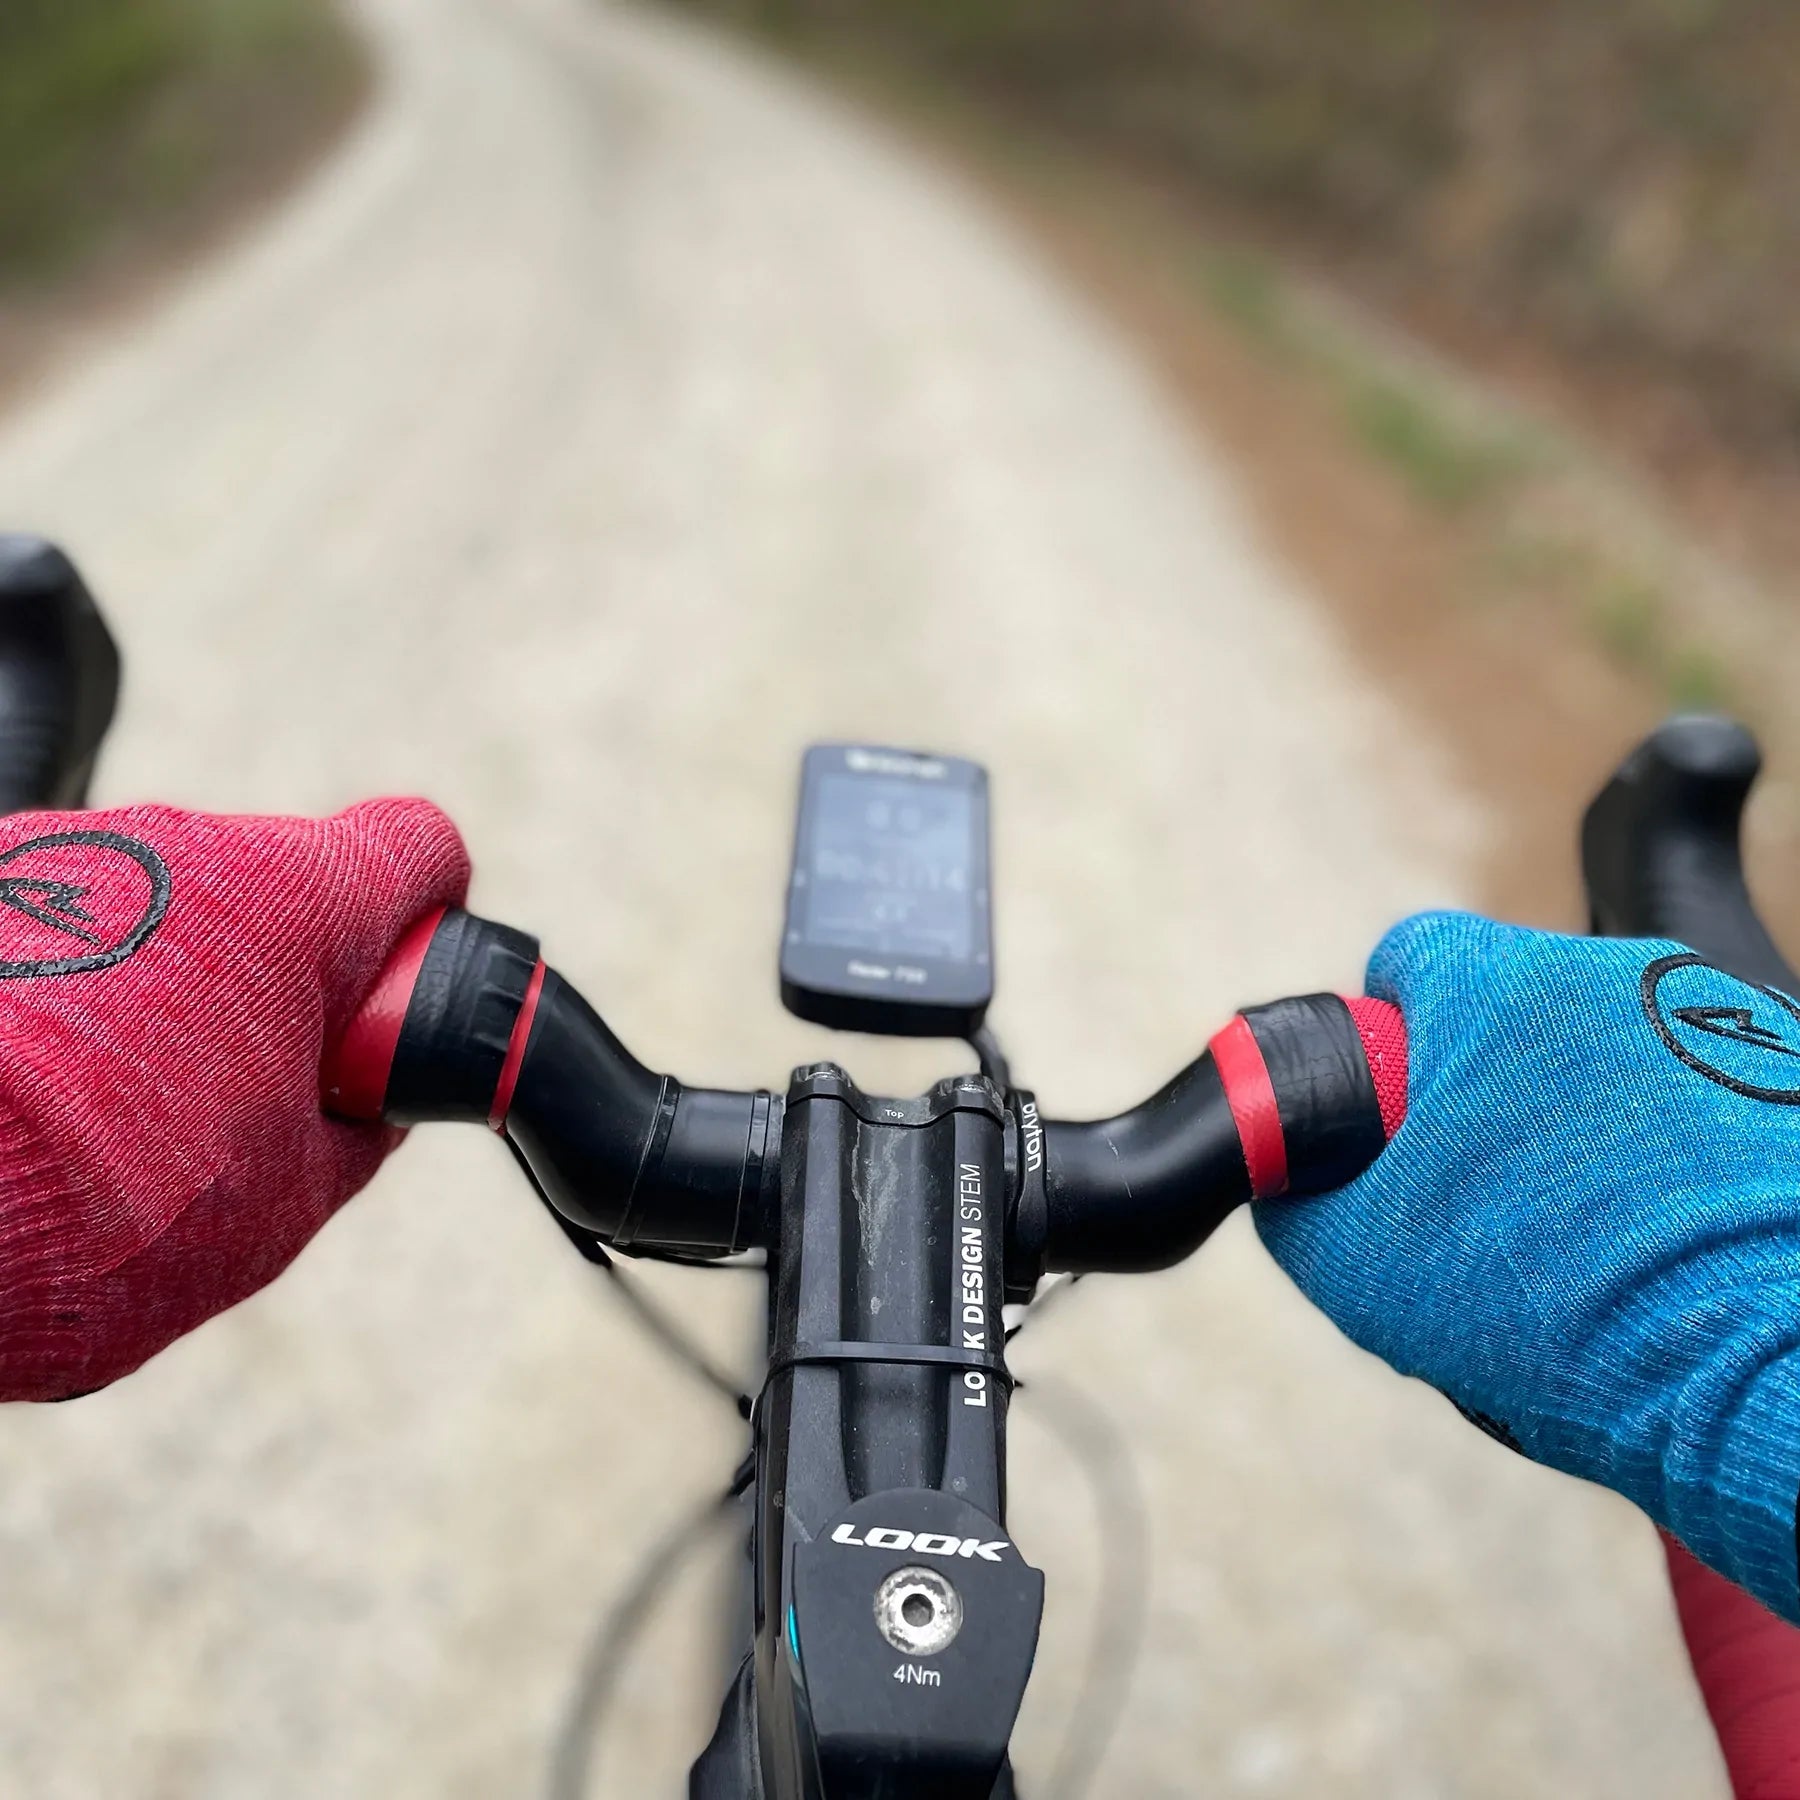 man riding bike with hands on handlebars wearing Merino wool DeFeet cycling gloves in red and blue